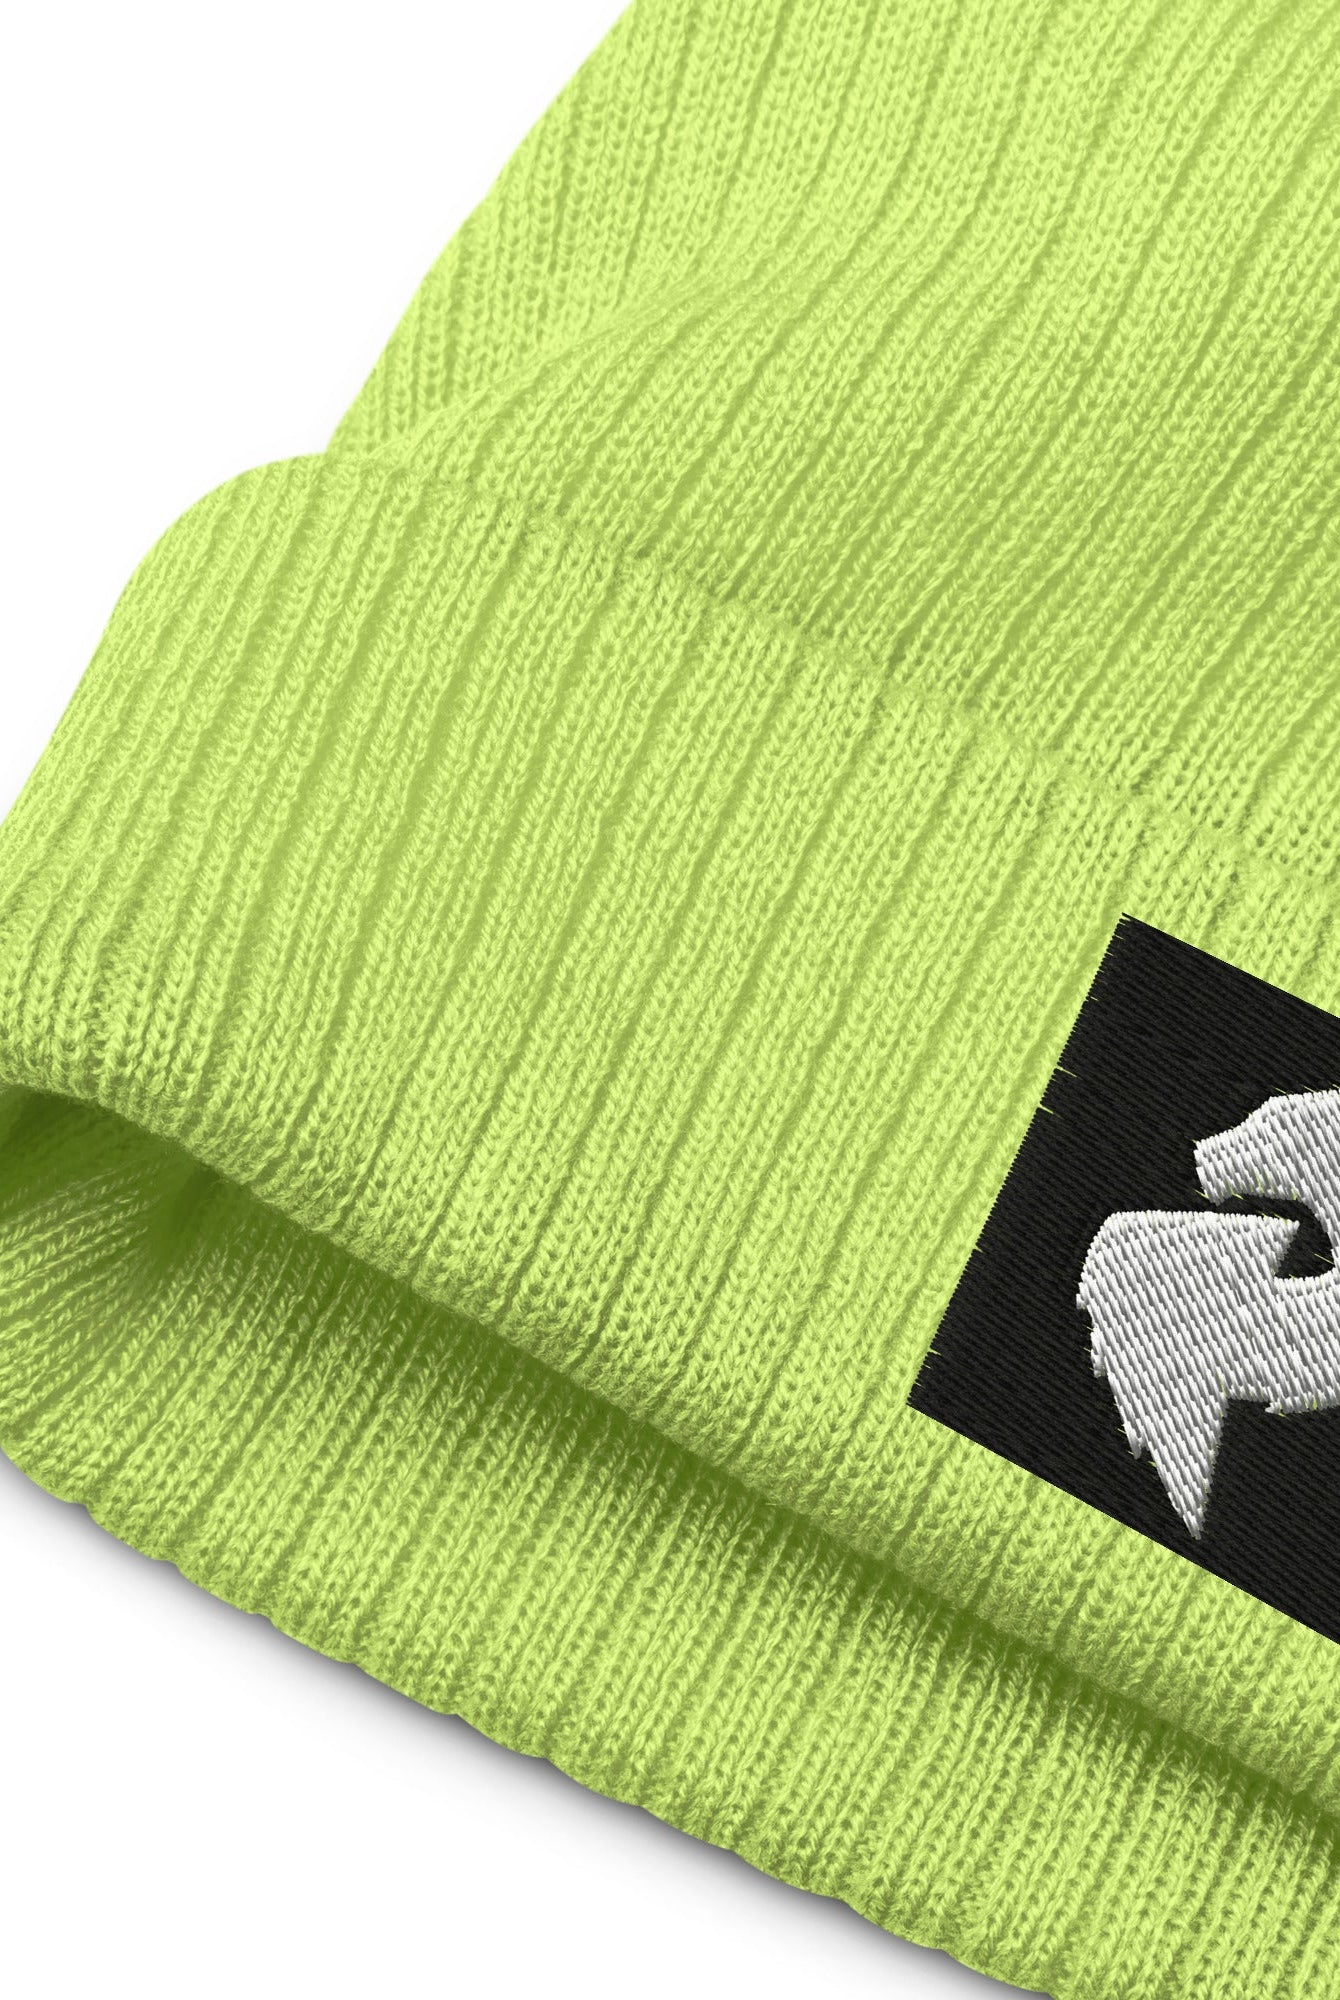 His or Hers Dragon Foxx™ Eco - Ribbed knit beanie - His or Hers Dragon Foxx™ Eco - Ribbed knit beanie - DRAGON FOXX™ - His or Hers Dragon Foxx™ Eco - Ribbed knit beanie - 2867494_15020 - Acid Green - - Accessories - Acid Green Eco - Ribbed knit beanie - Beanie